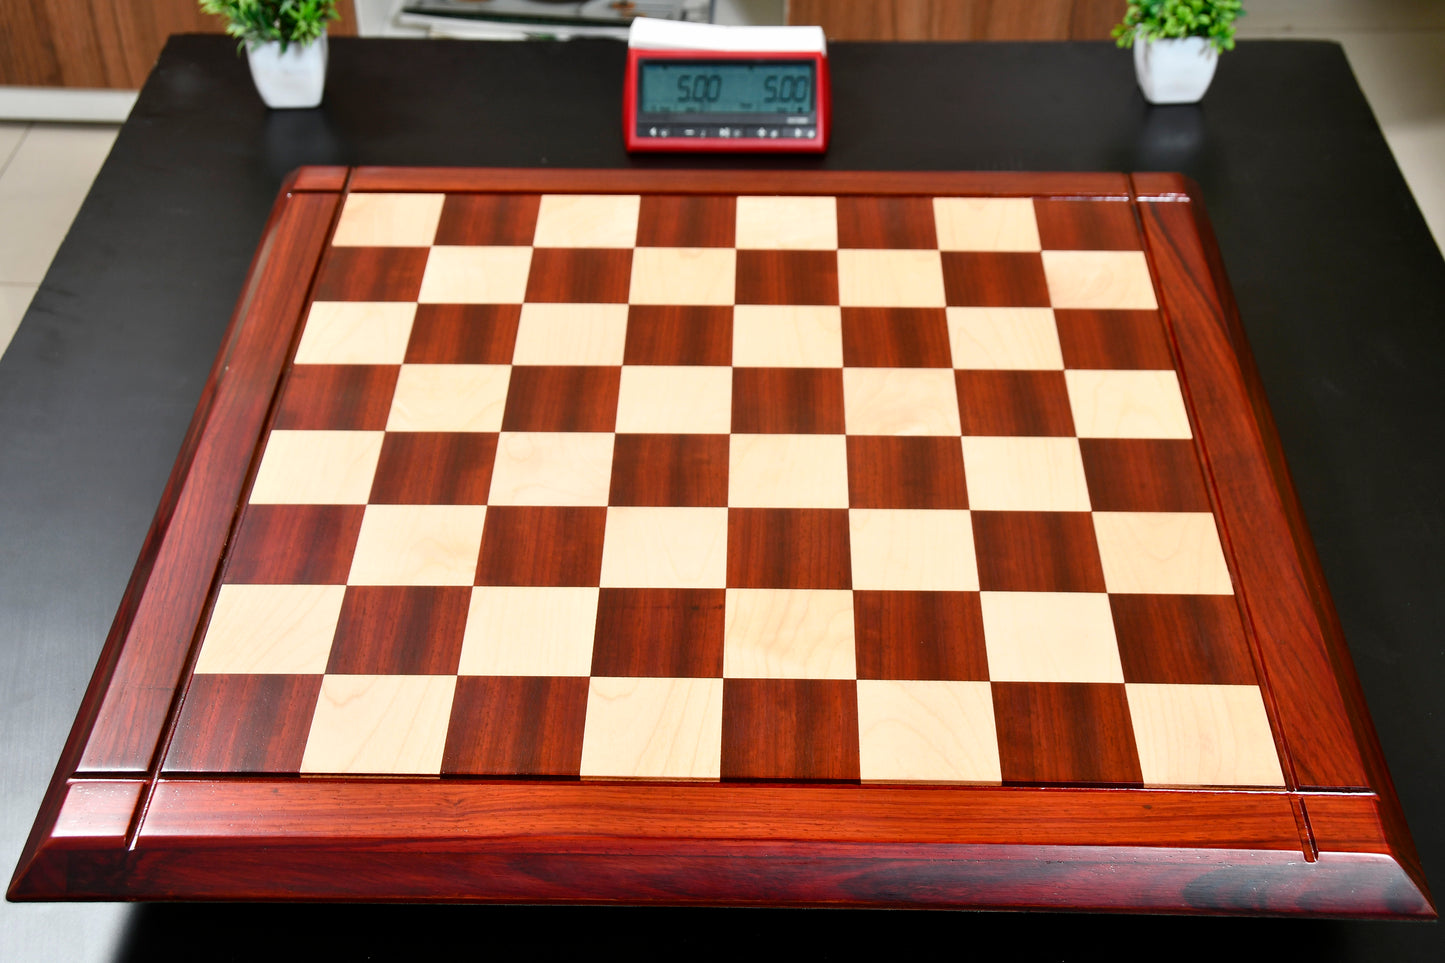 Deluxe Bud Rosewood / Maple Wooden Chess Board 23" - 60 mm